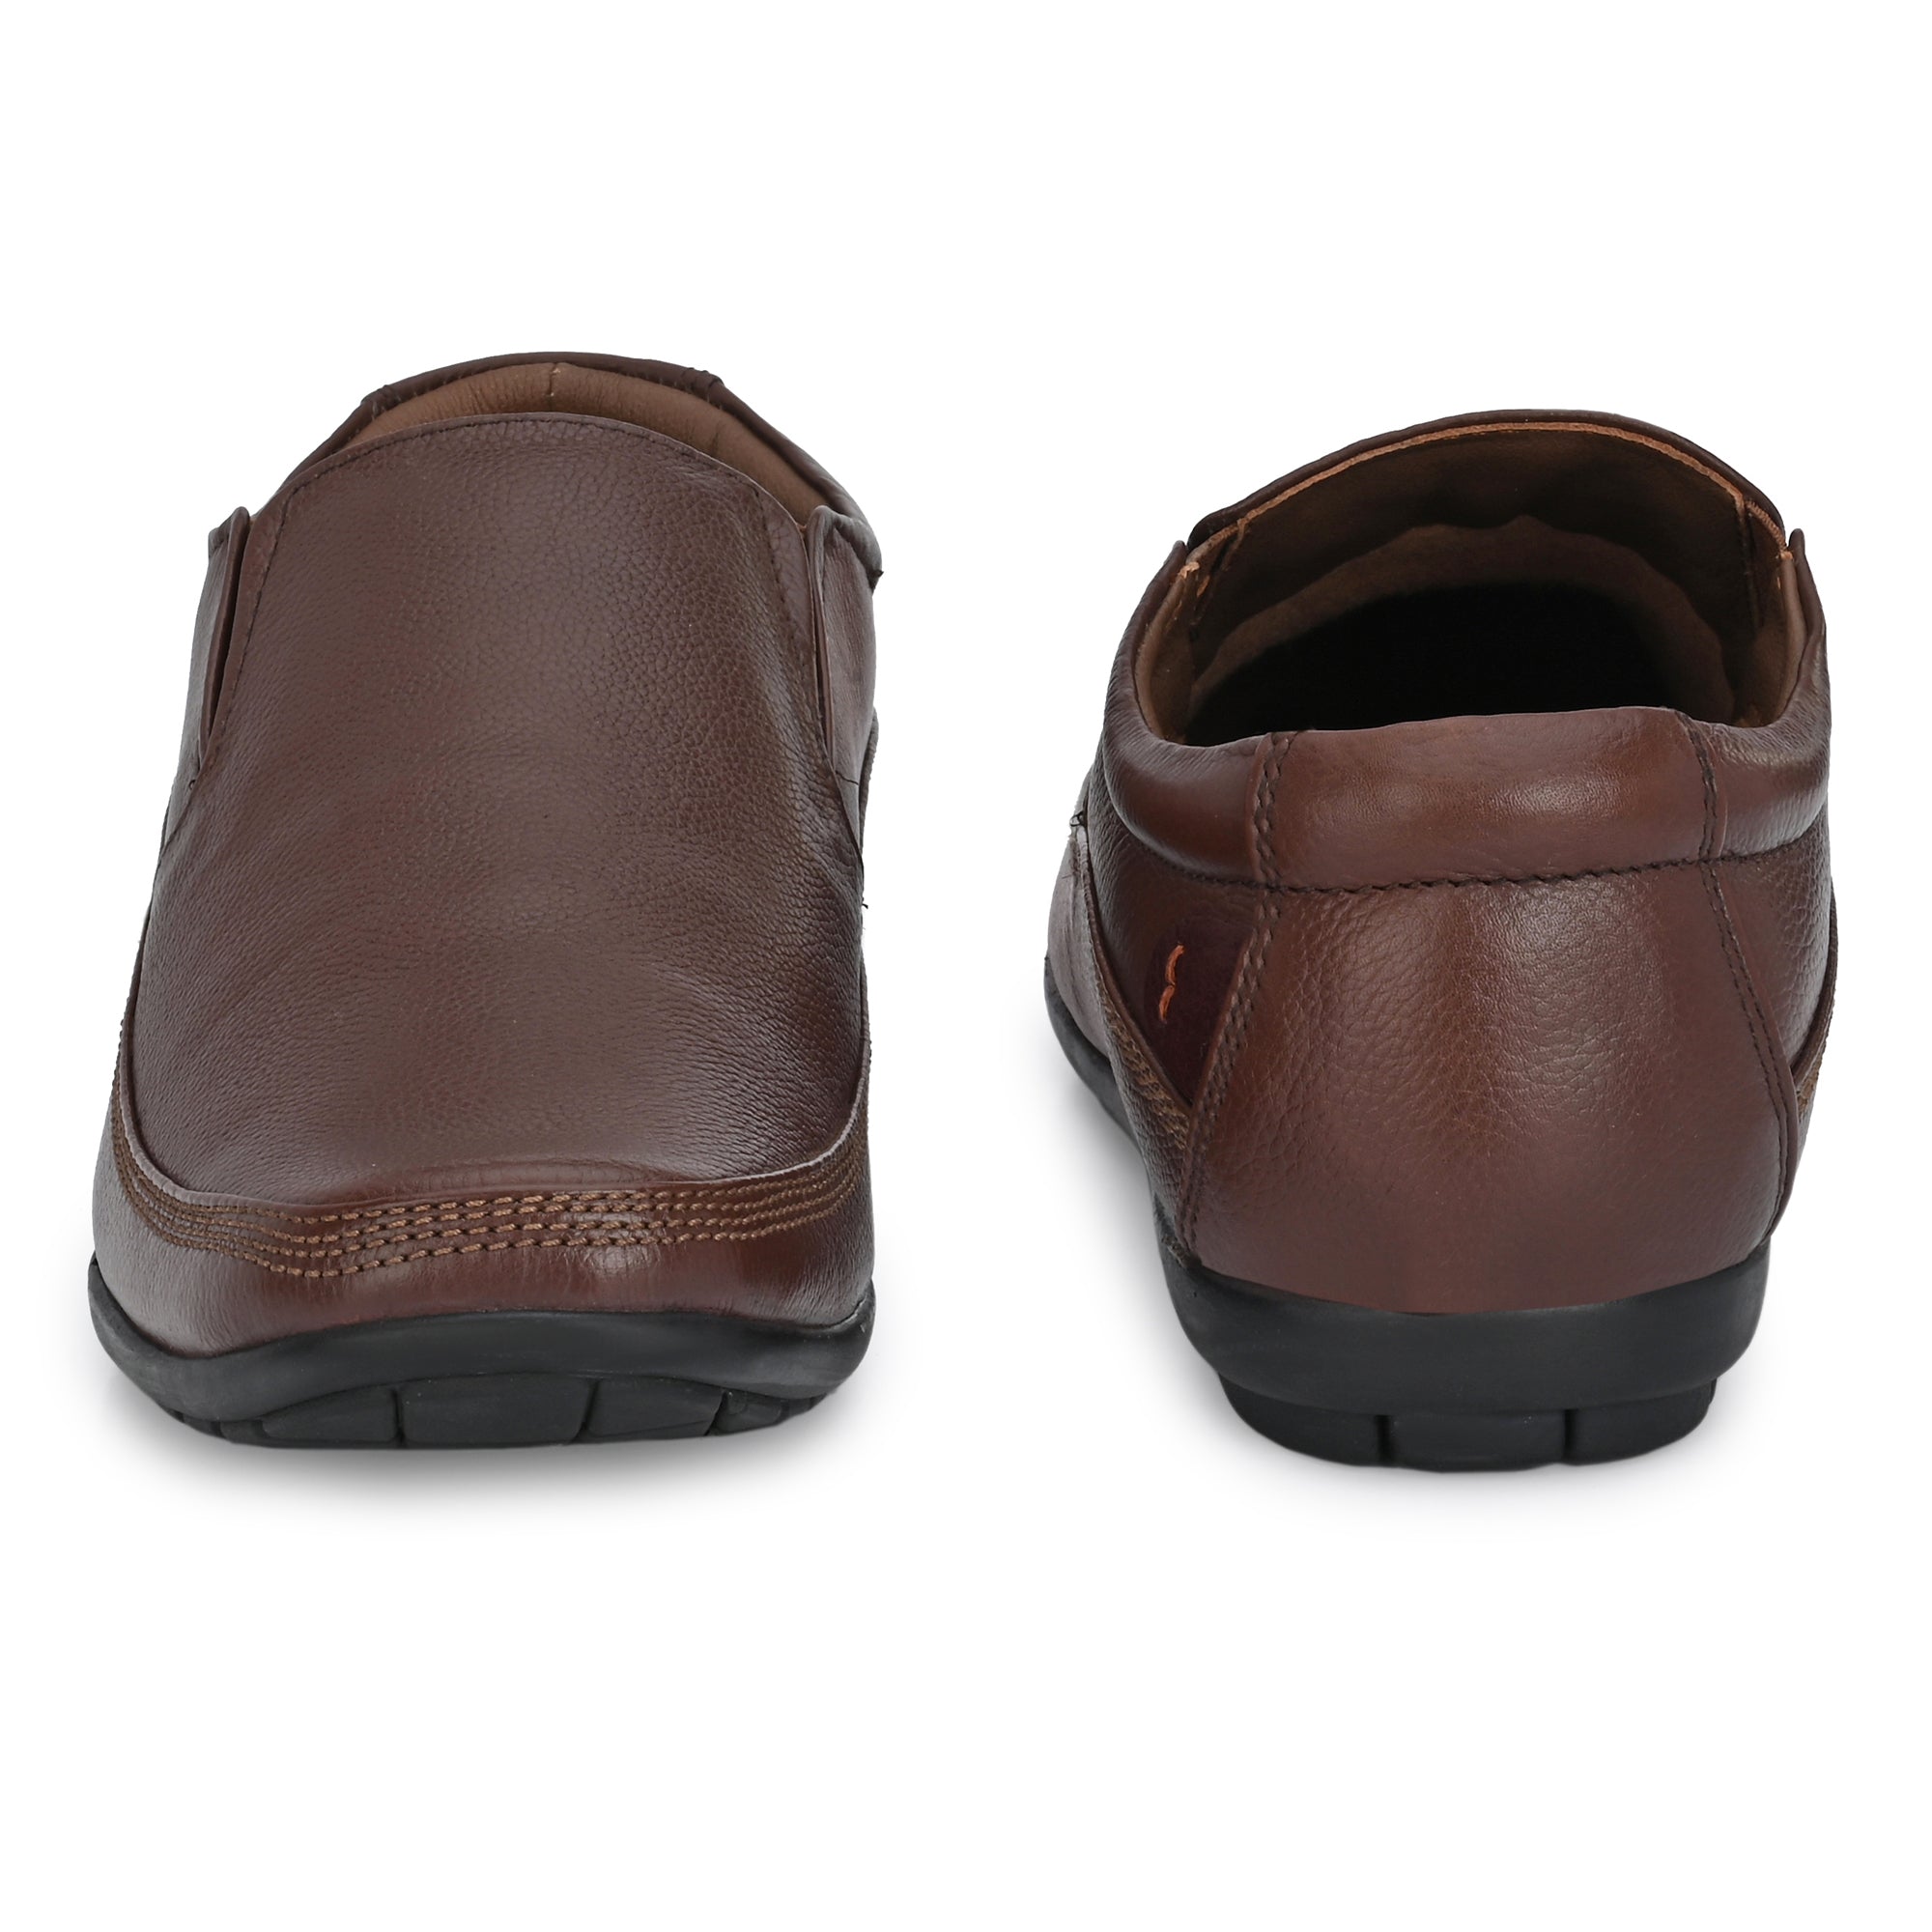 Egoss Leather Casuals Shoes for Men without Laces